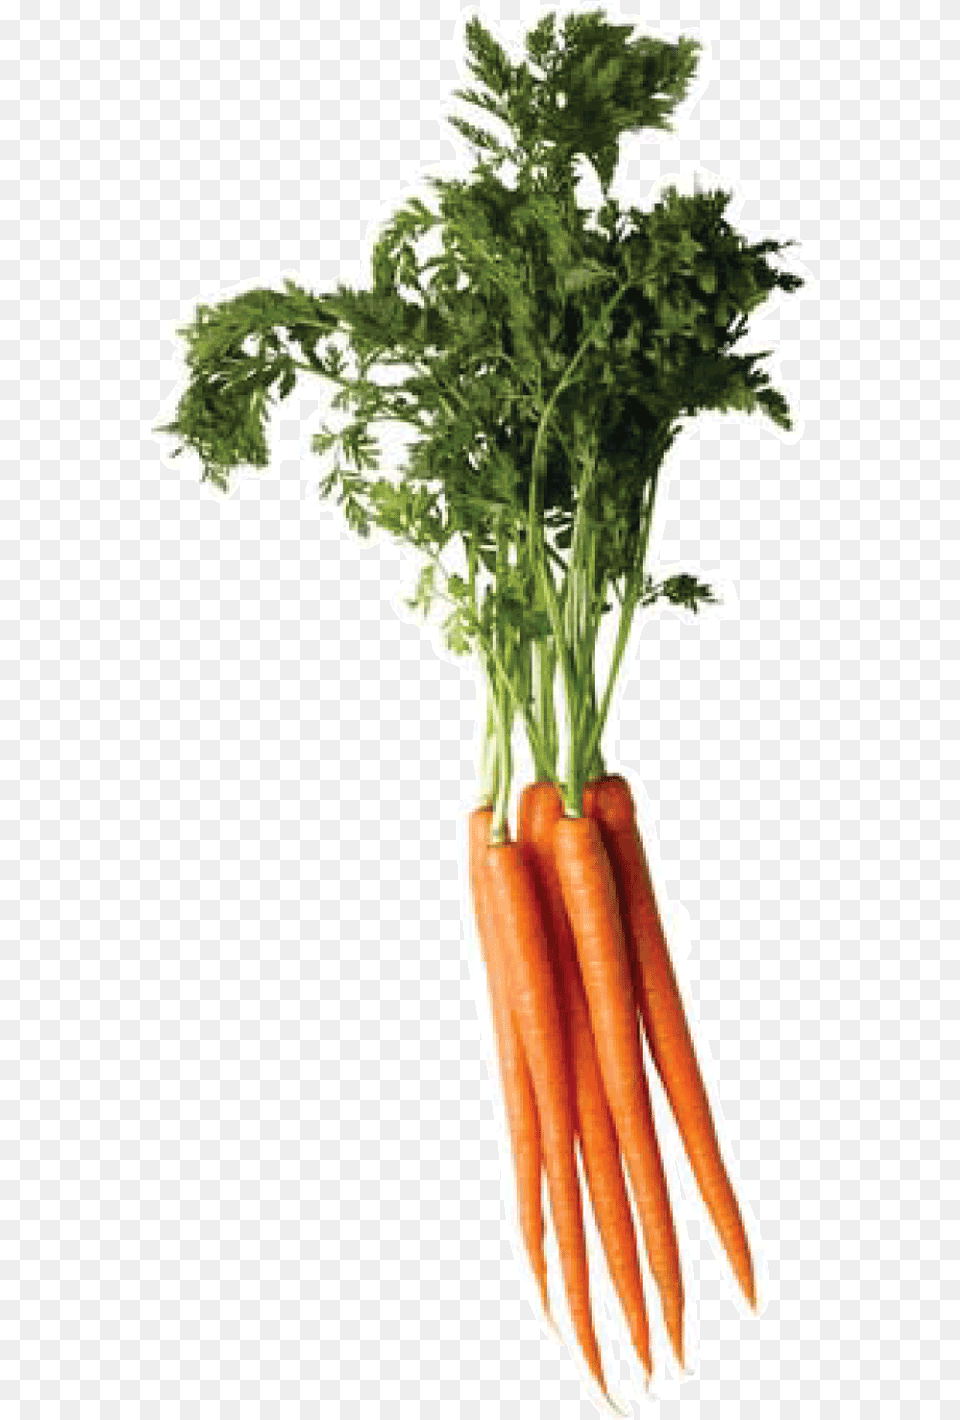 Carrot Carrot Top, Food, Plant, Produce, Vegetable Png Image